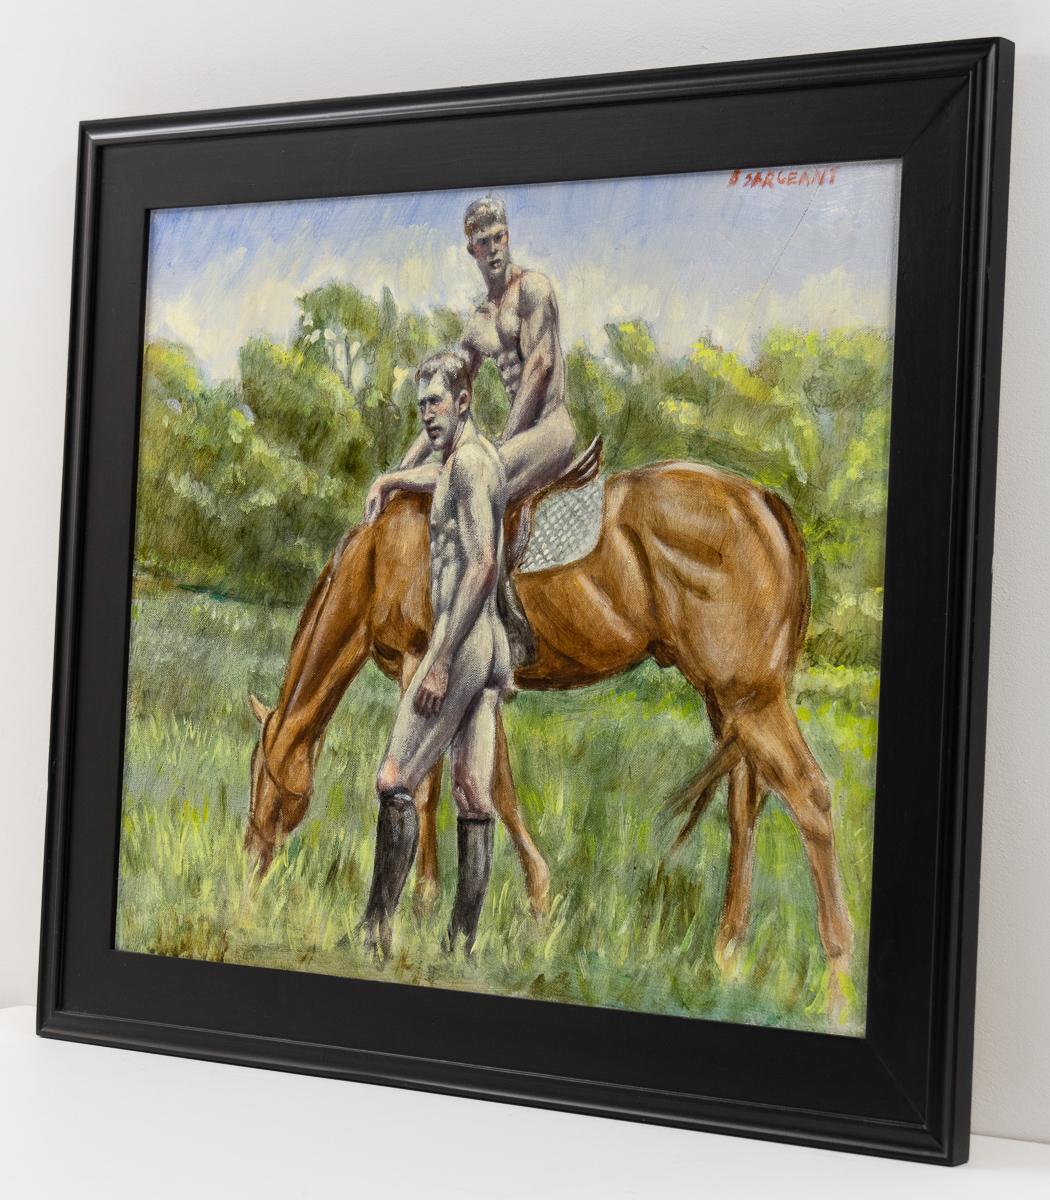 [Bruce Sargeant (1898-1938)] Two Men with Horse - Contemporary Painting by Mark Beard